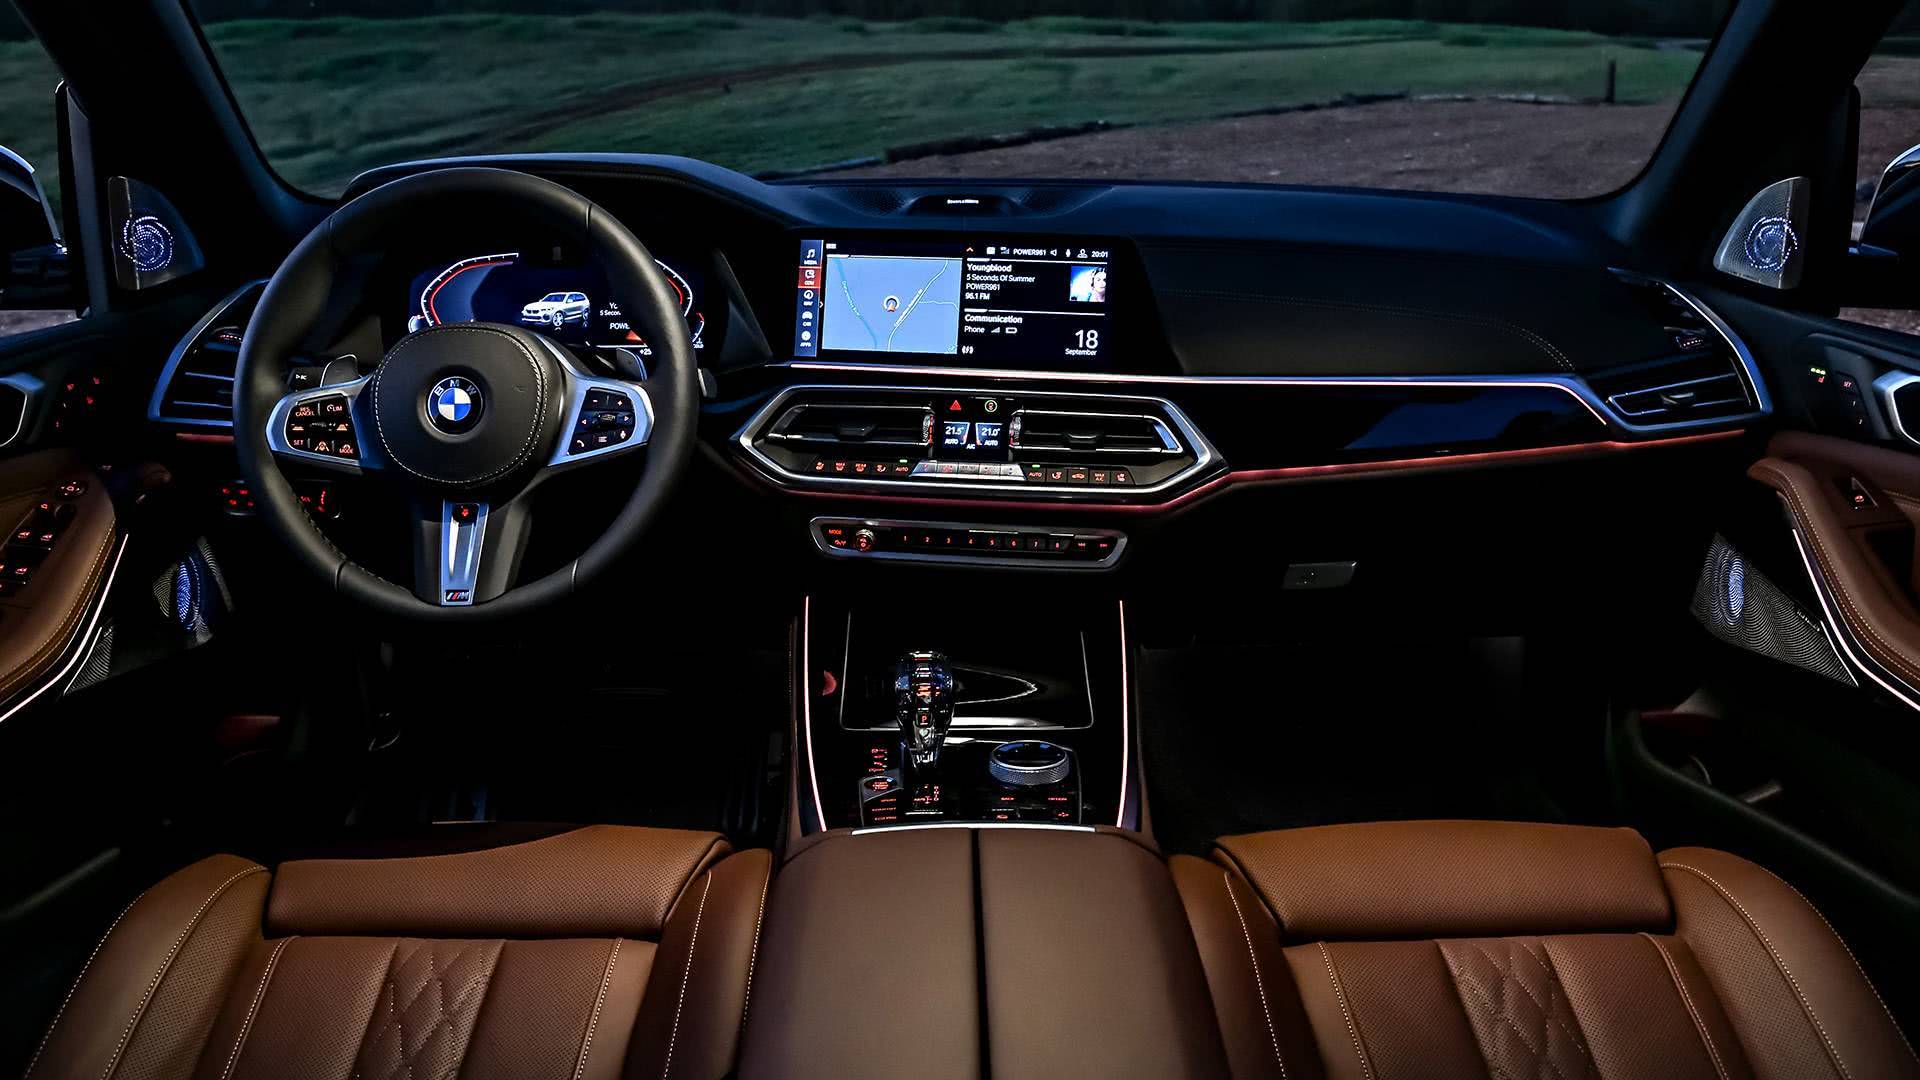 Architecture of BMW's infotainment system.